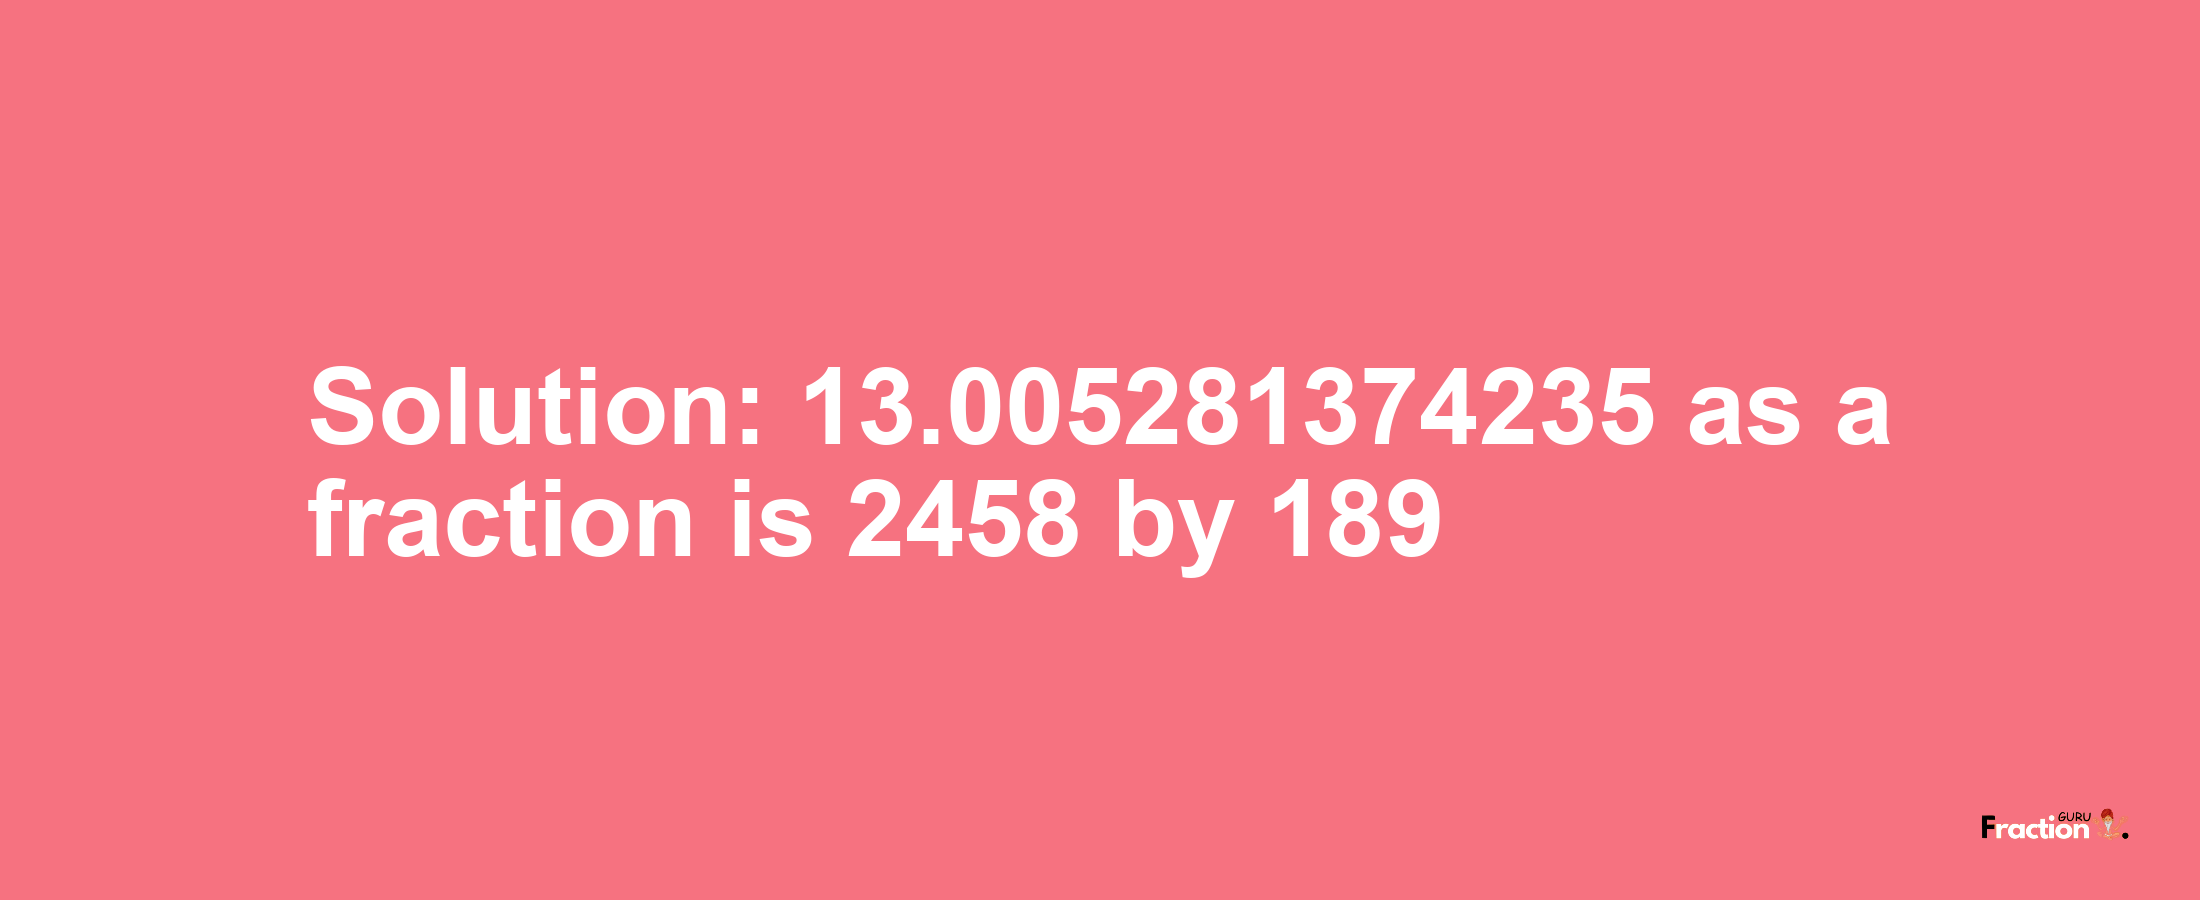 Solution:13.005281374235 as a fraction is 2458/189